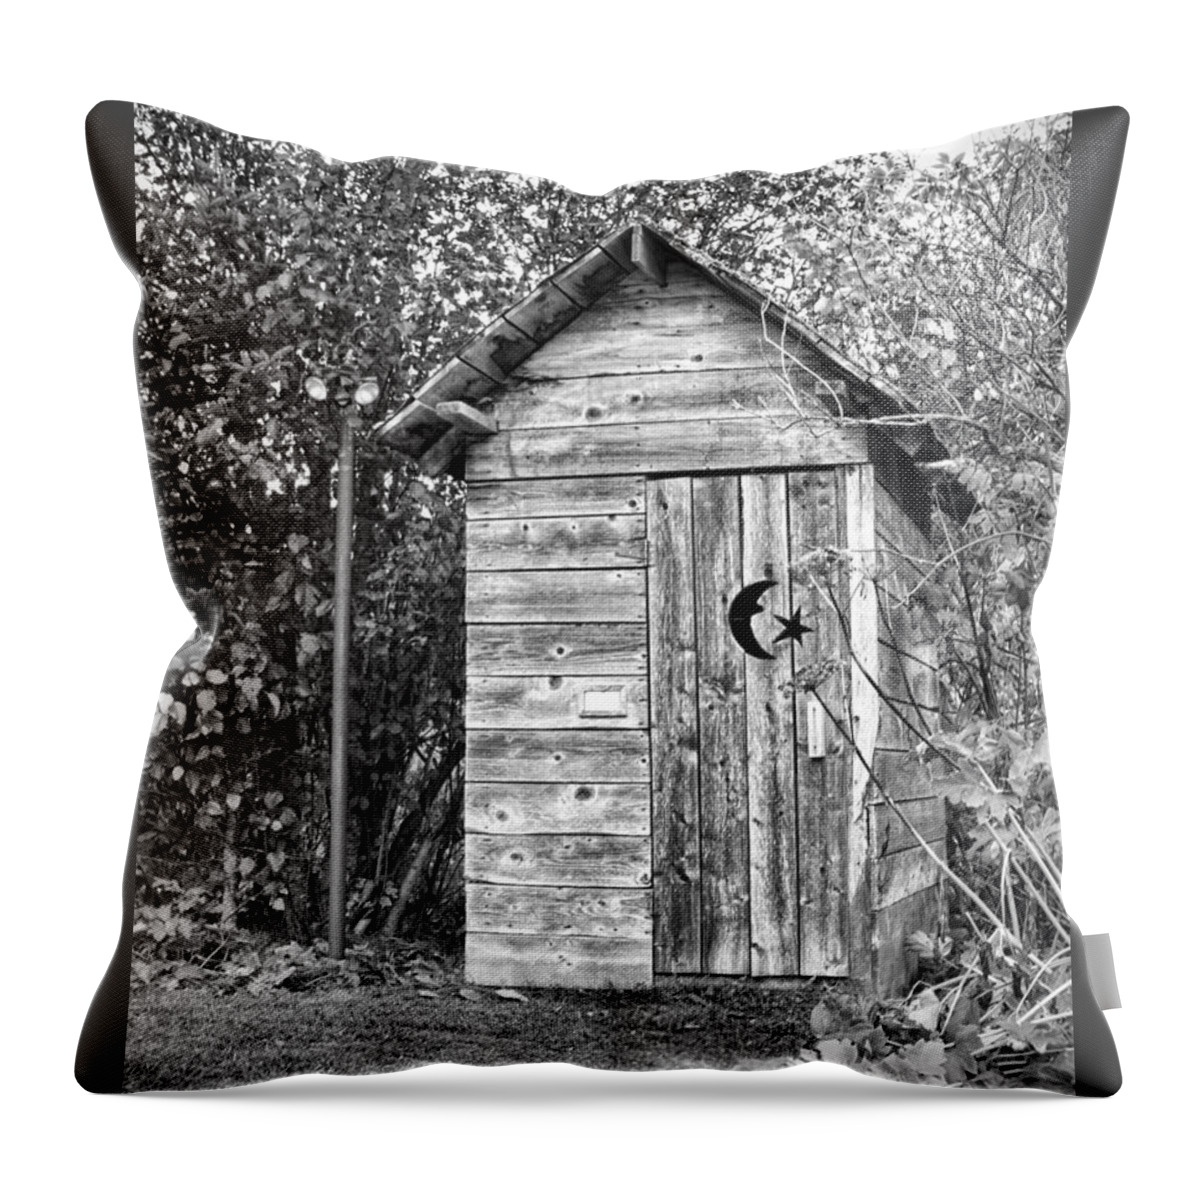 The Outhouse Bw Throw Pillow featuring the photograph The Outhouse BW by Phyllis Taylor